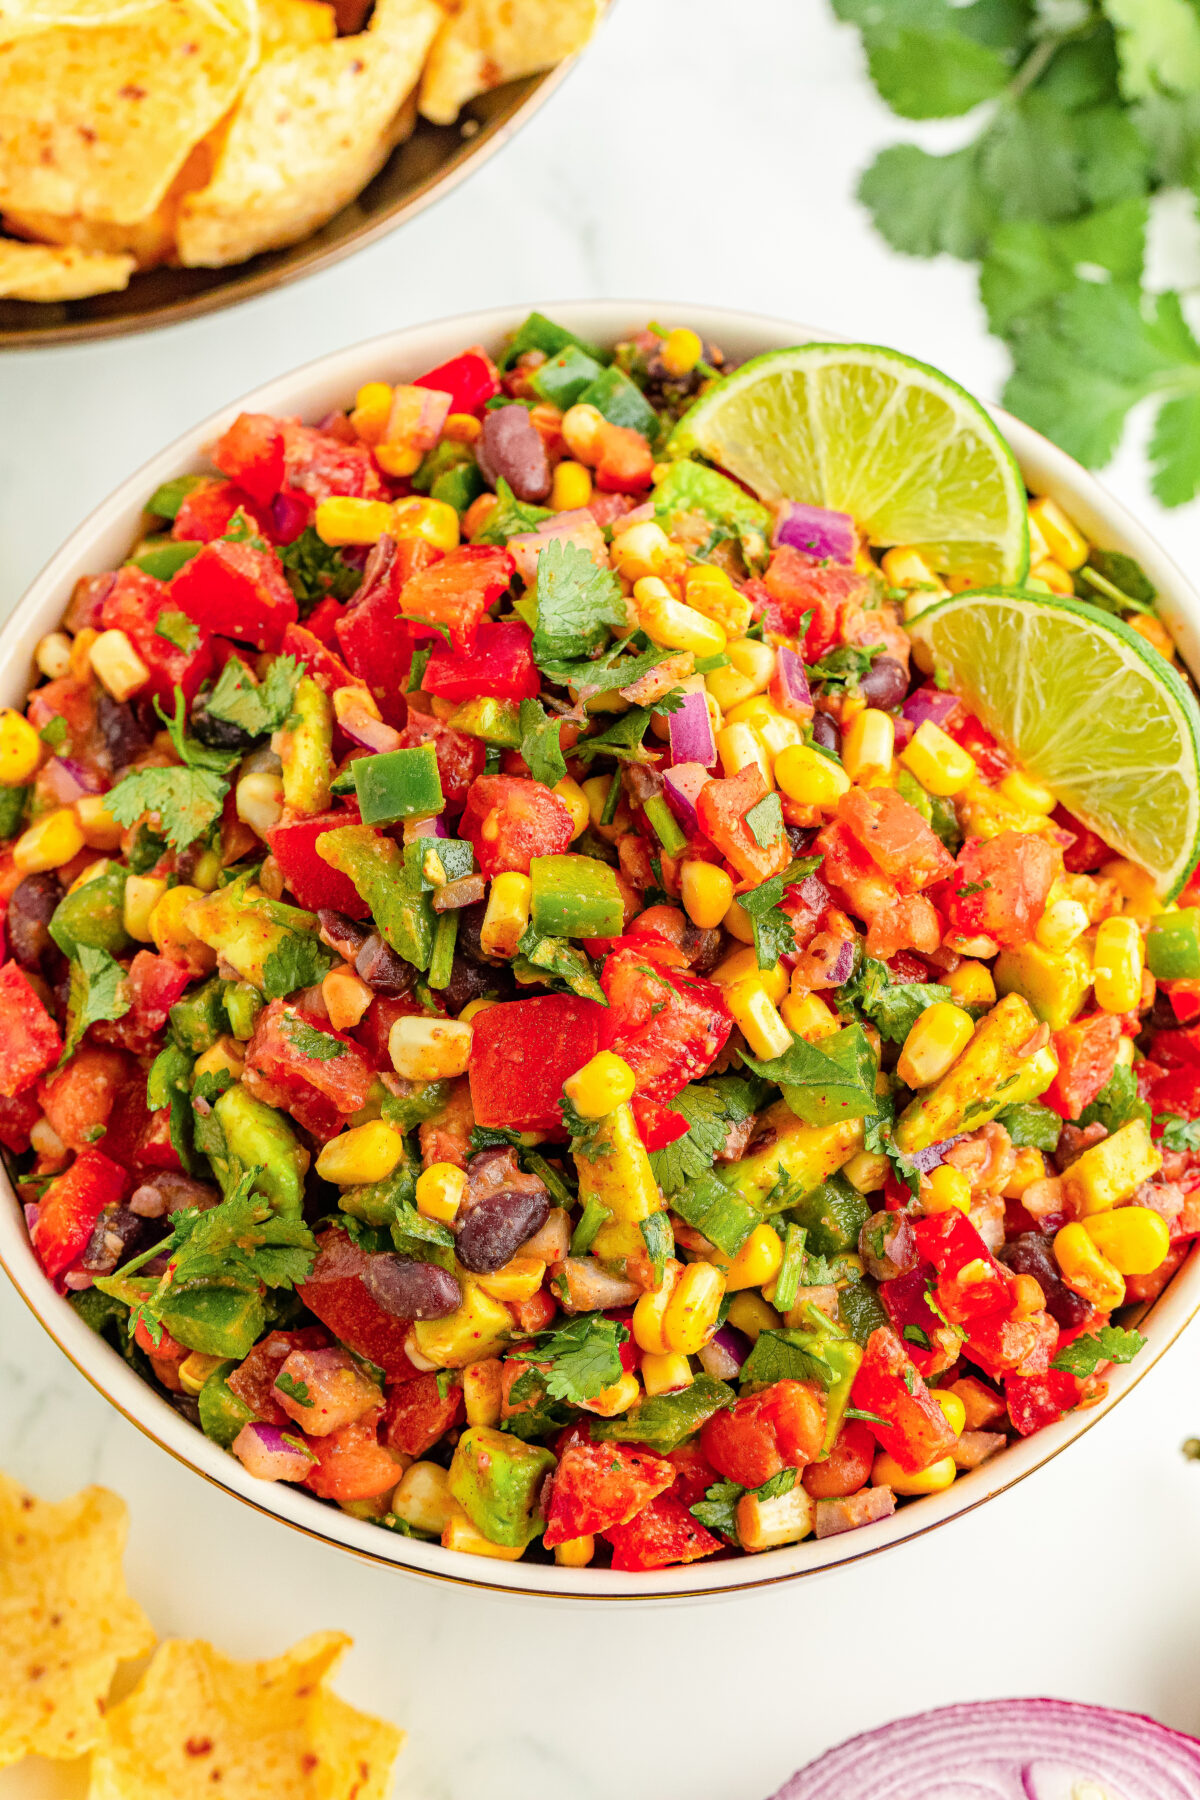 Discover a hearty cowboy caviar recipe, loaded with beans and fresh produce tossed in zesty lime dressing for a delicious, flavoursome dish.